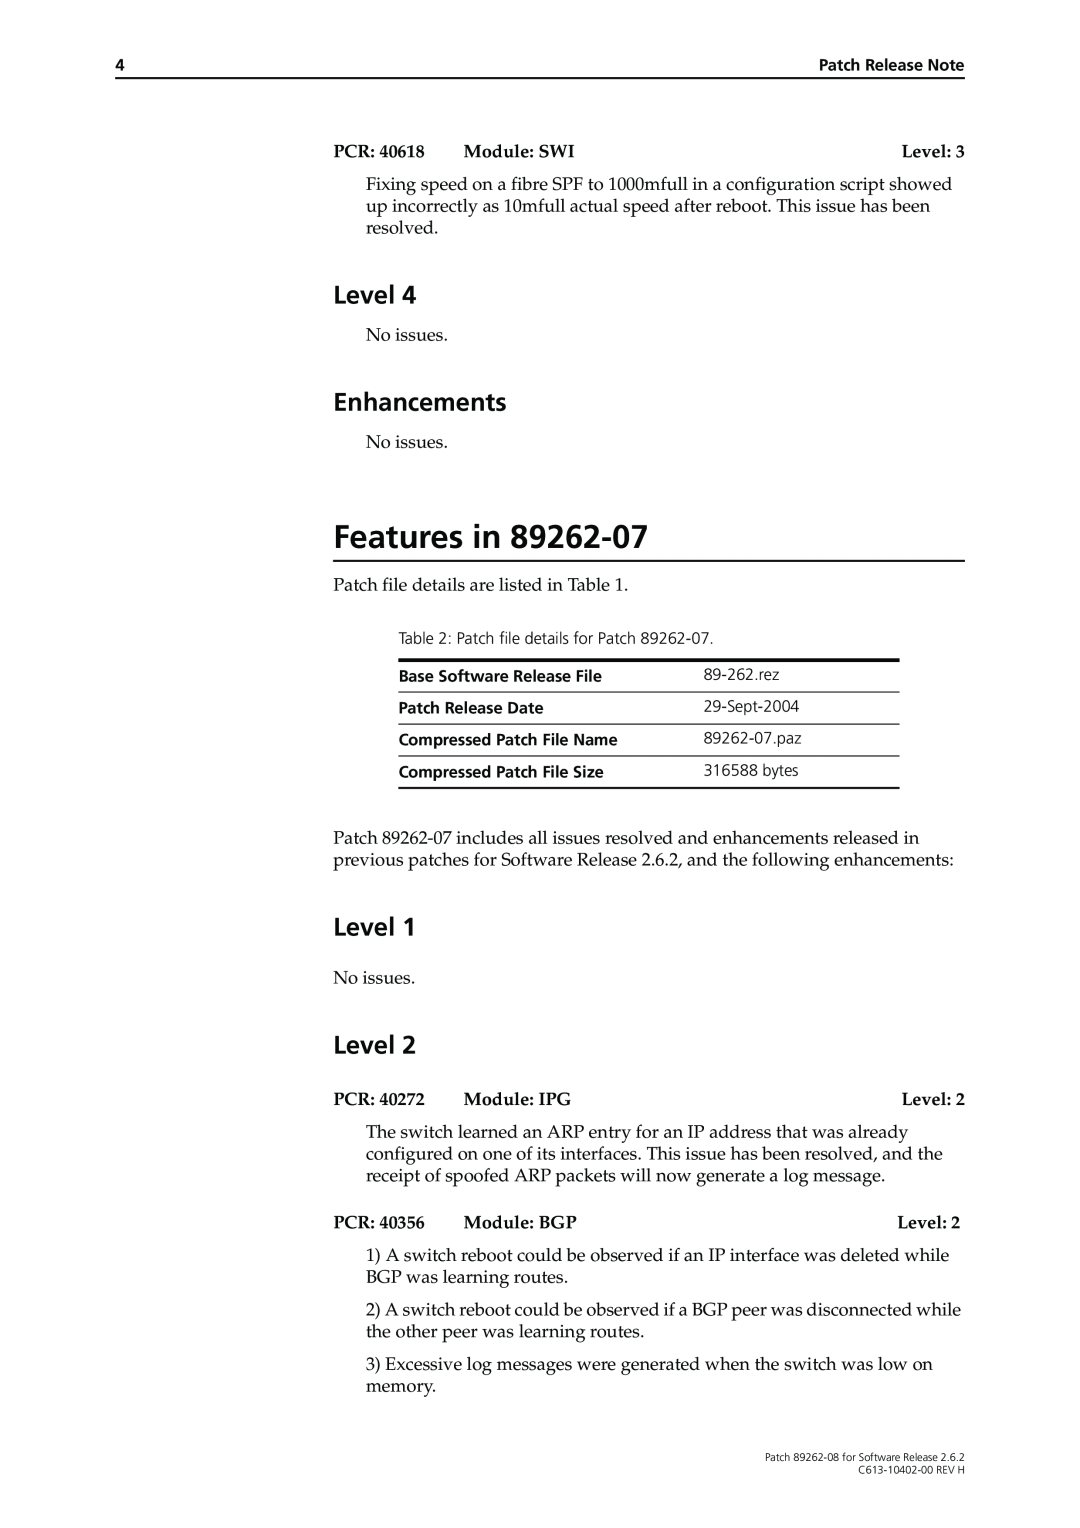 Allied Telesis Patch 89262-08 manual Enhancements, Features in, Level 